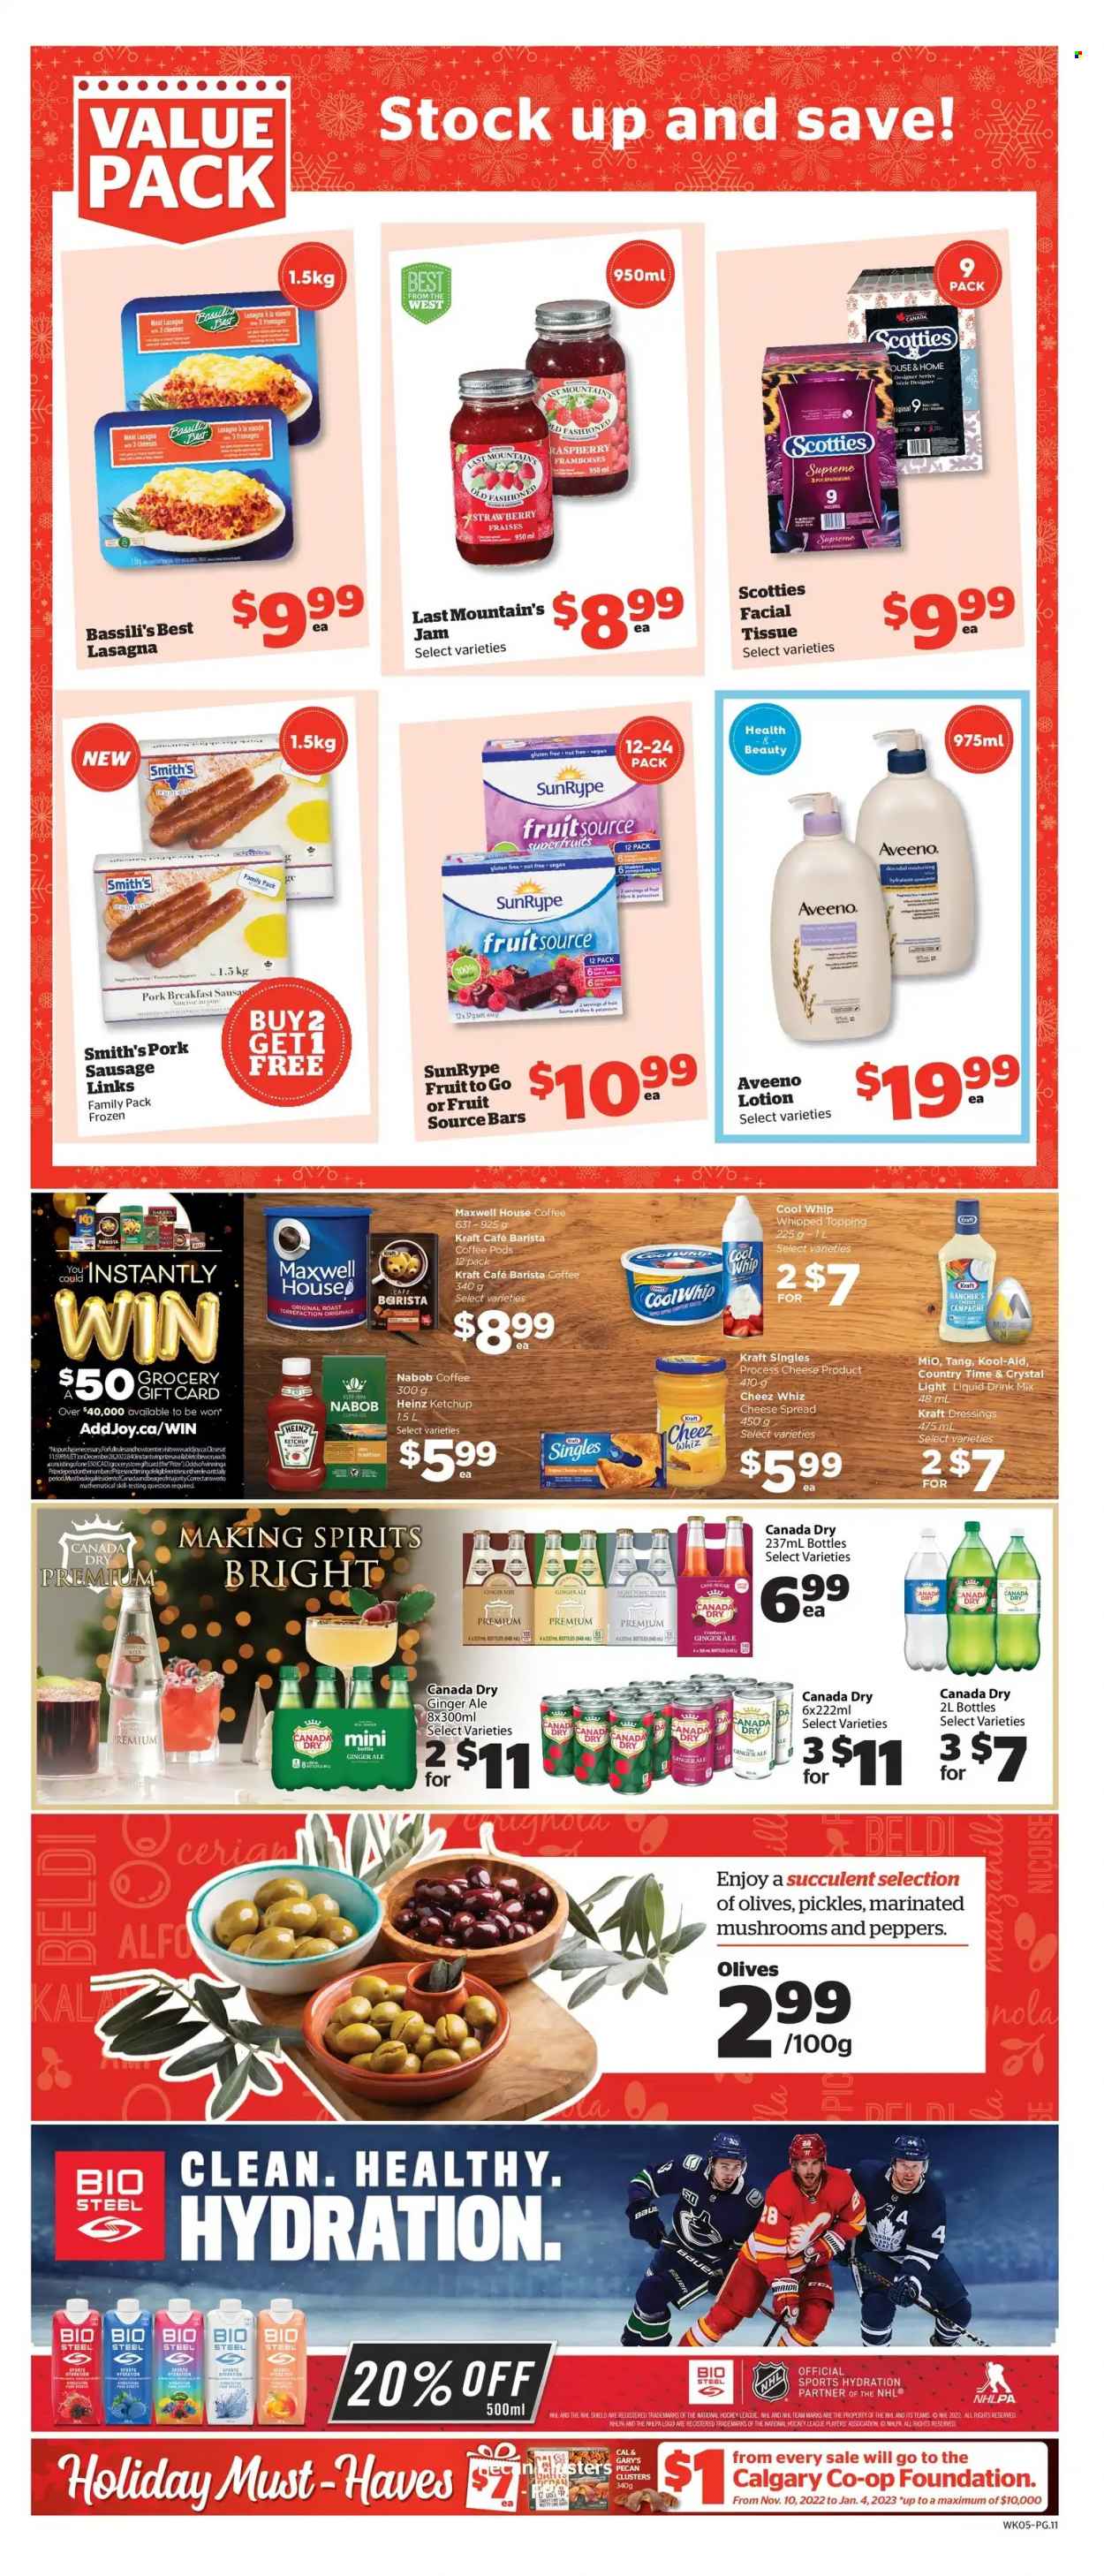 thumbnail - Calgary Co-op Flyer - December 01, 2022 - December 07, 2022 - Sales products - peppers, lasagna meal, Kraft®, sausage, pork sausage, cheese spread, sandwich slices, Kraft Singles, Cool Whip, Ola, Smith's, cane sugar, sugar, topping, fruit jam, Canada Dry, ginger ale, tonic, Country Time, Maxwell House, coffee, coffee pods, beer, Aveeno, tissues, body lotion, Heinz, ketchup, olives, ginger beer. Page 15.